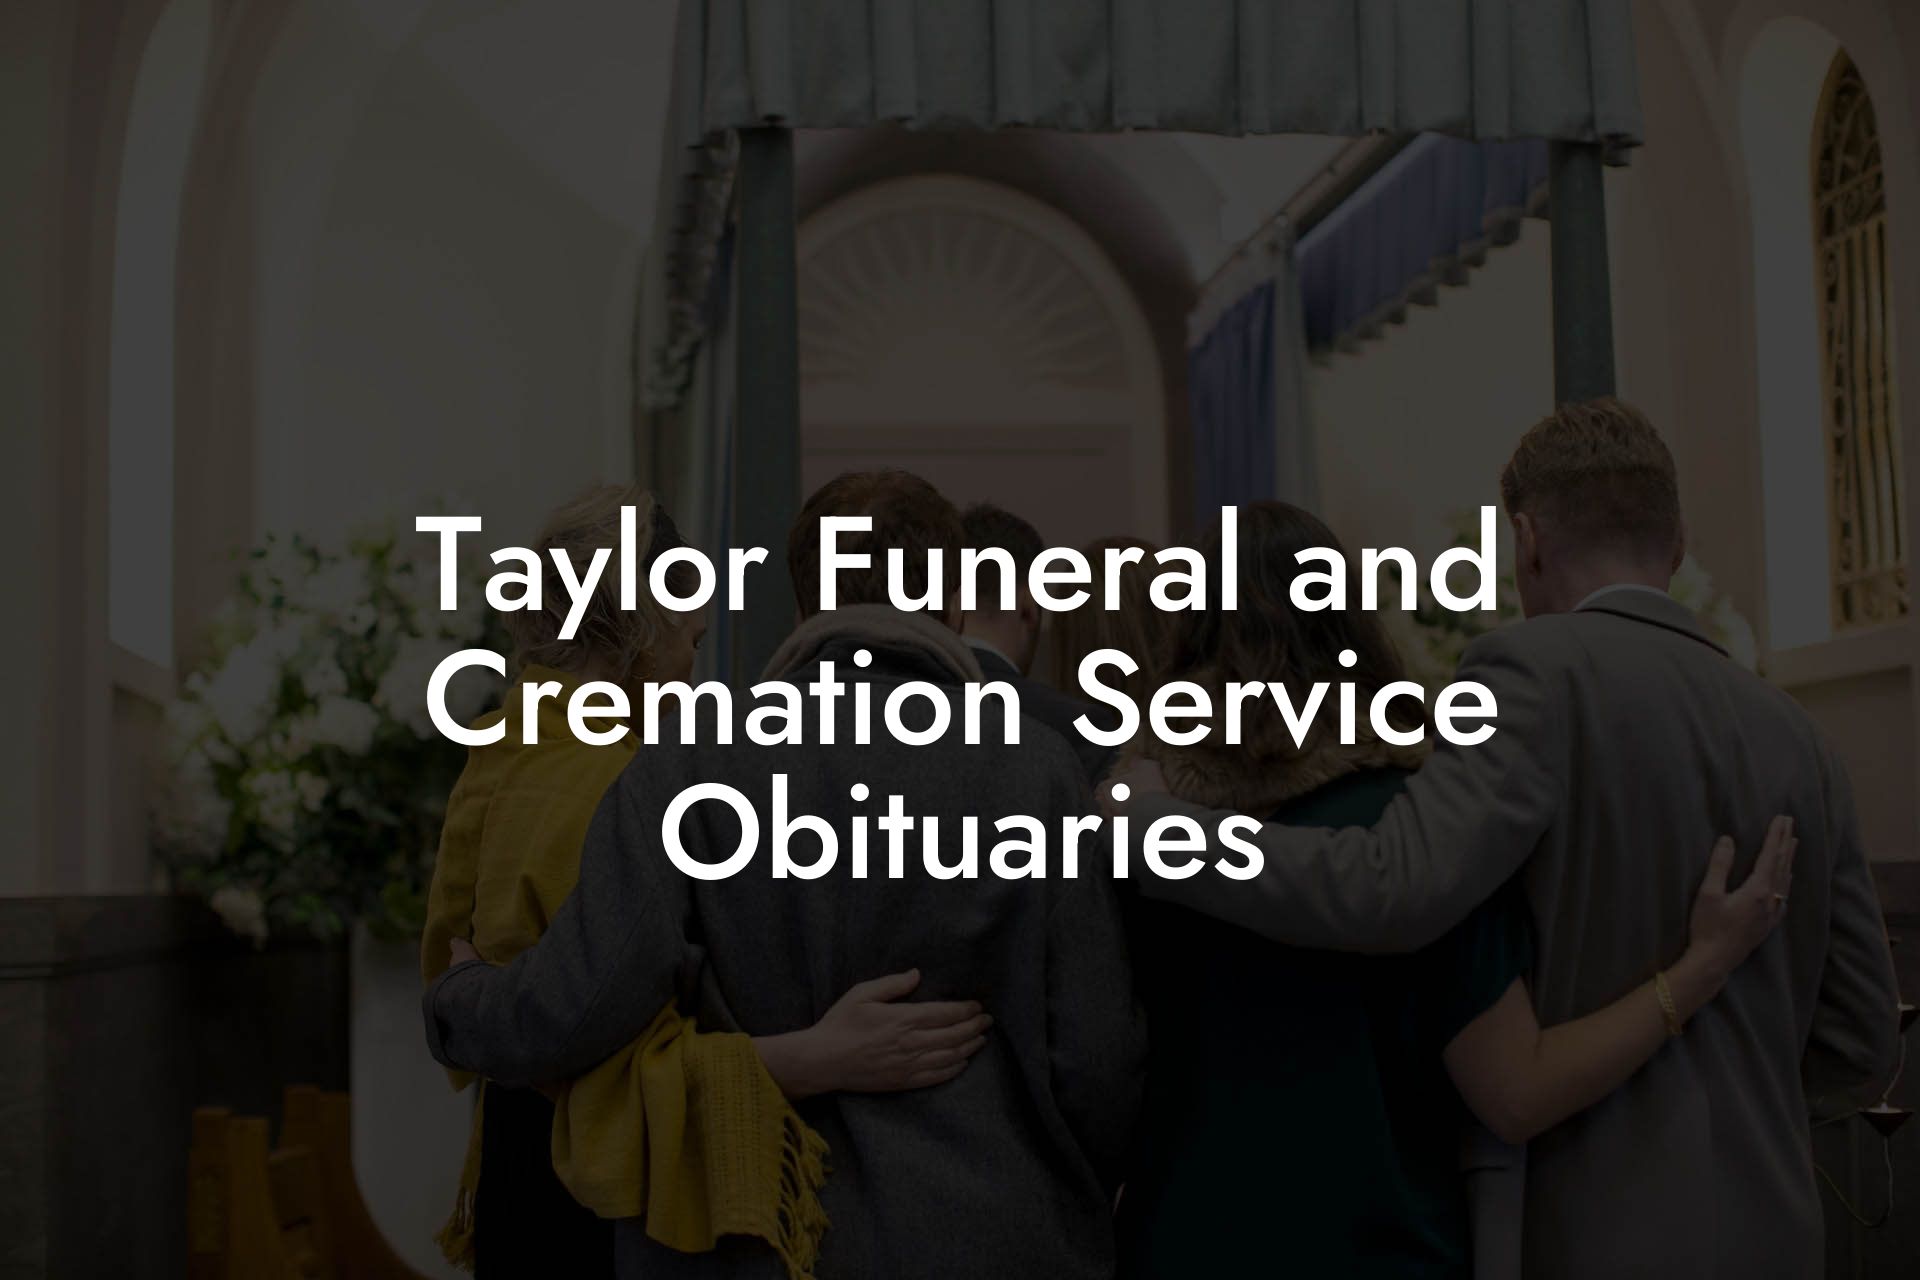 Taylor Funeral and Cremation Service Obituaries